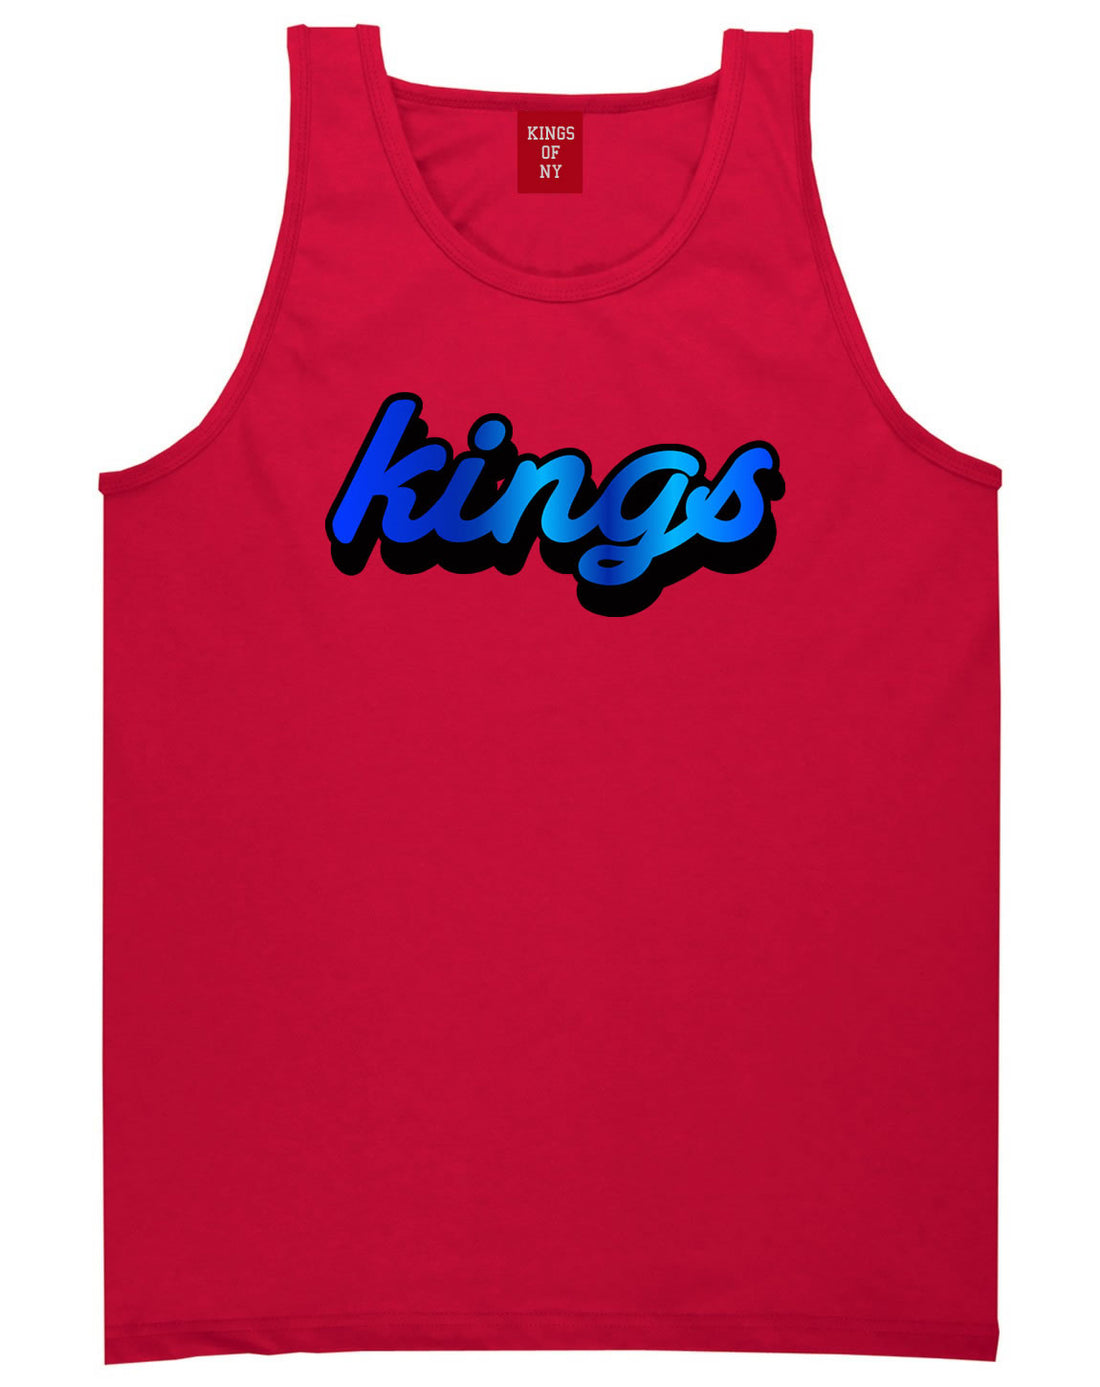 Kings Blue Gradient Logo Tank Top in Red By Kings Of NY